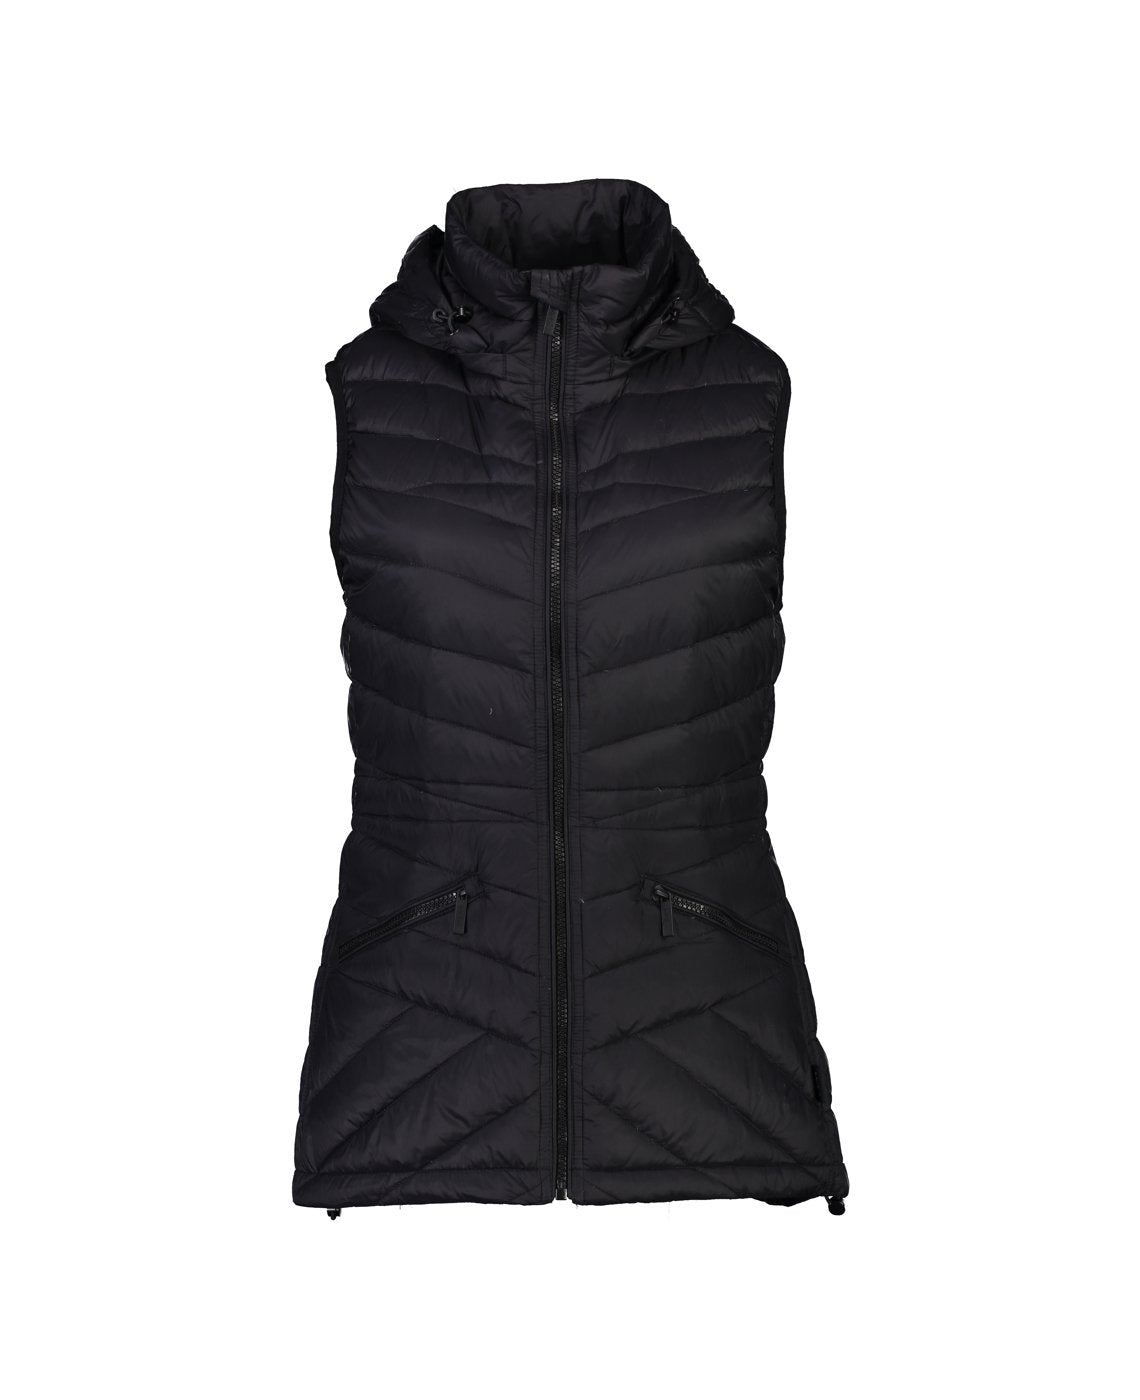 Mary-Claire Puffer Vest - Black